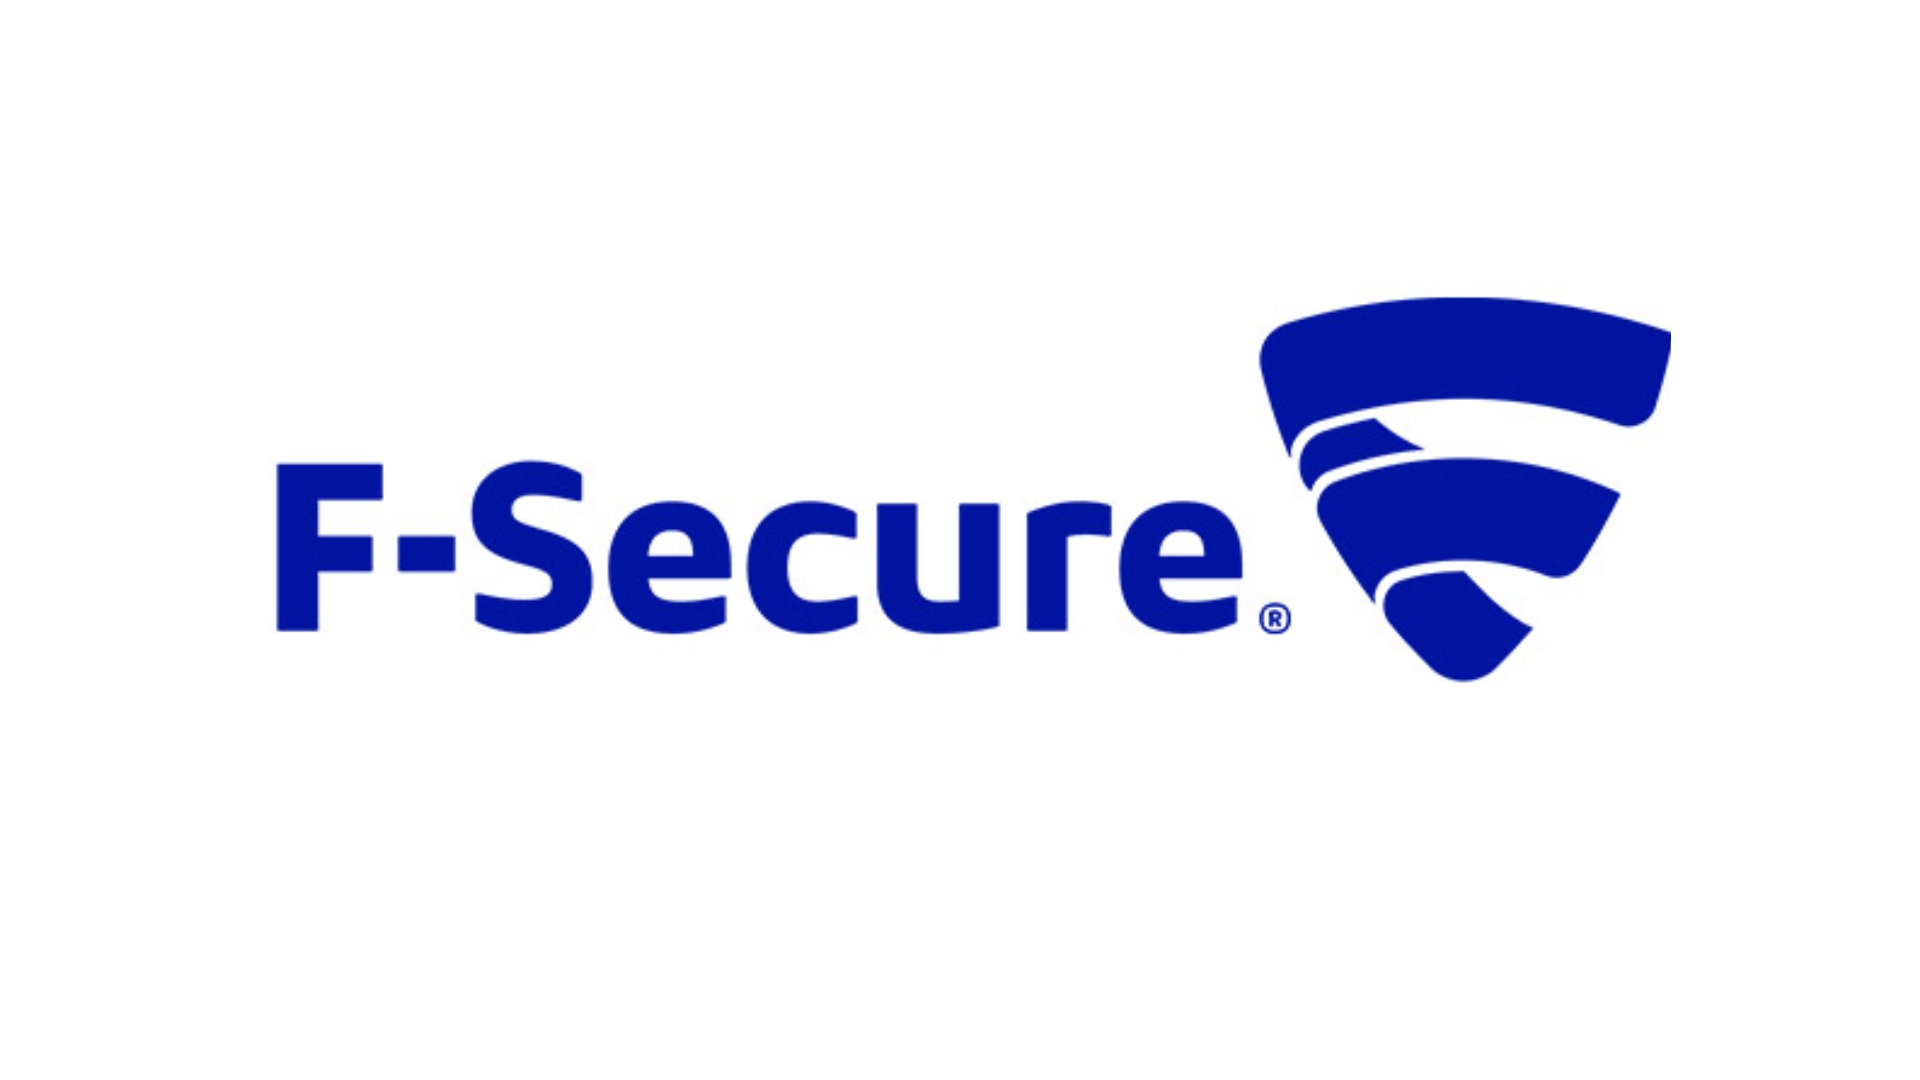 Best antivirus for PC - F-Secure. Its logo is on a white background.